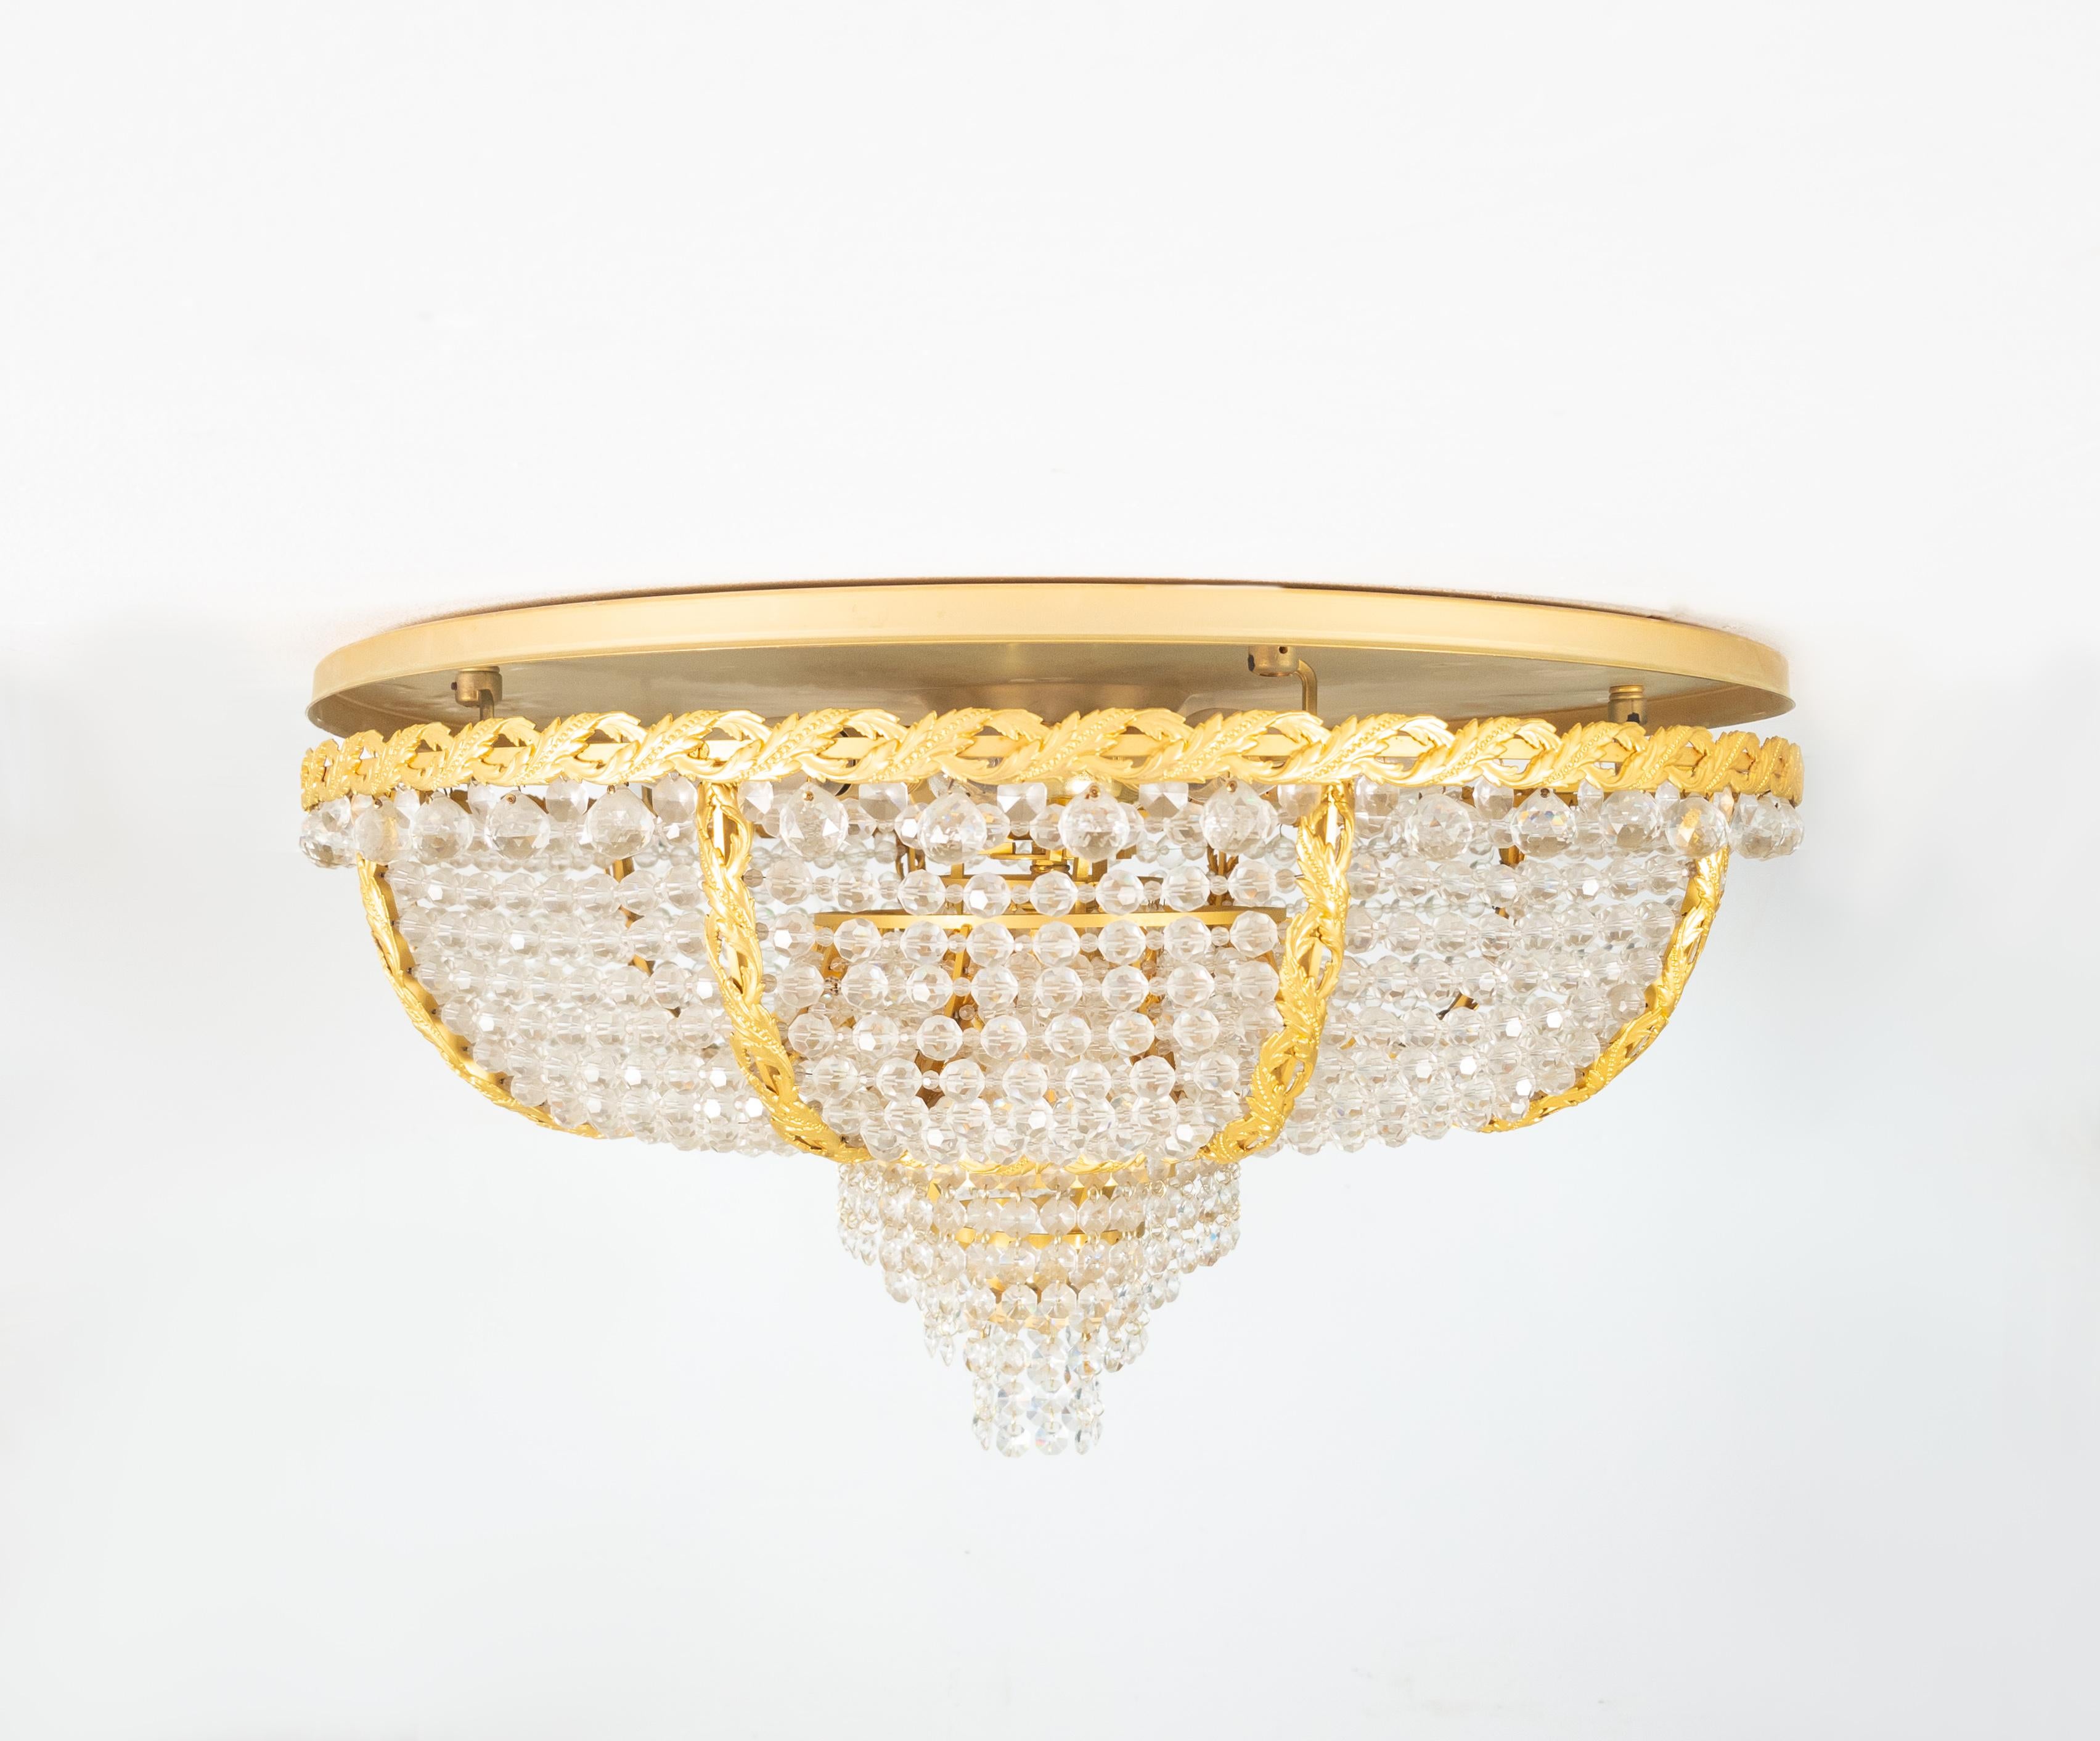 Large Palwa Germany 1970s flushmount. Luxury gilded bronze, with hand cut faceted crystals. Very good condition.
1970s fit for a palace. 11 bulbs. Beautiful nothing missing.



Measurements: Height 33 cm, diameter 62 cm.